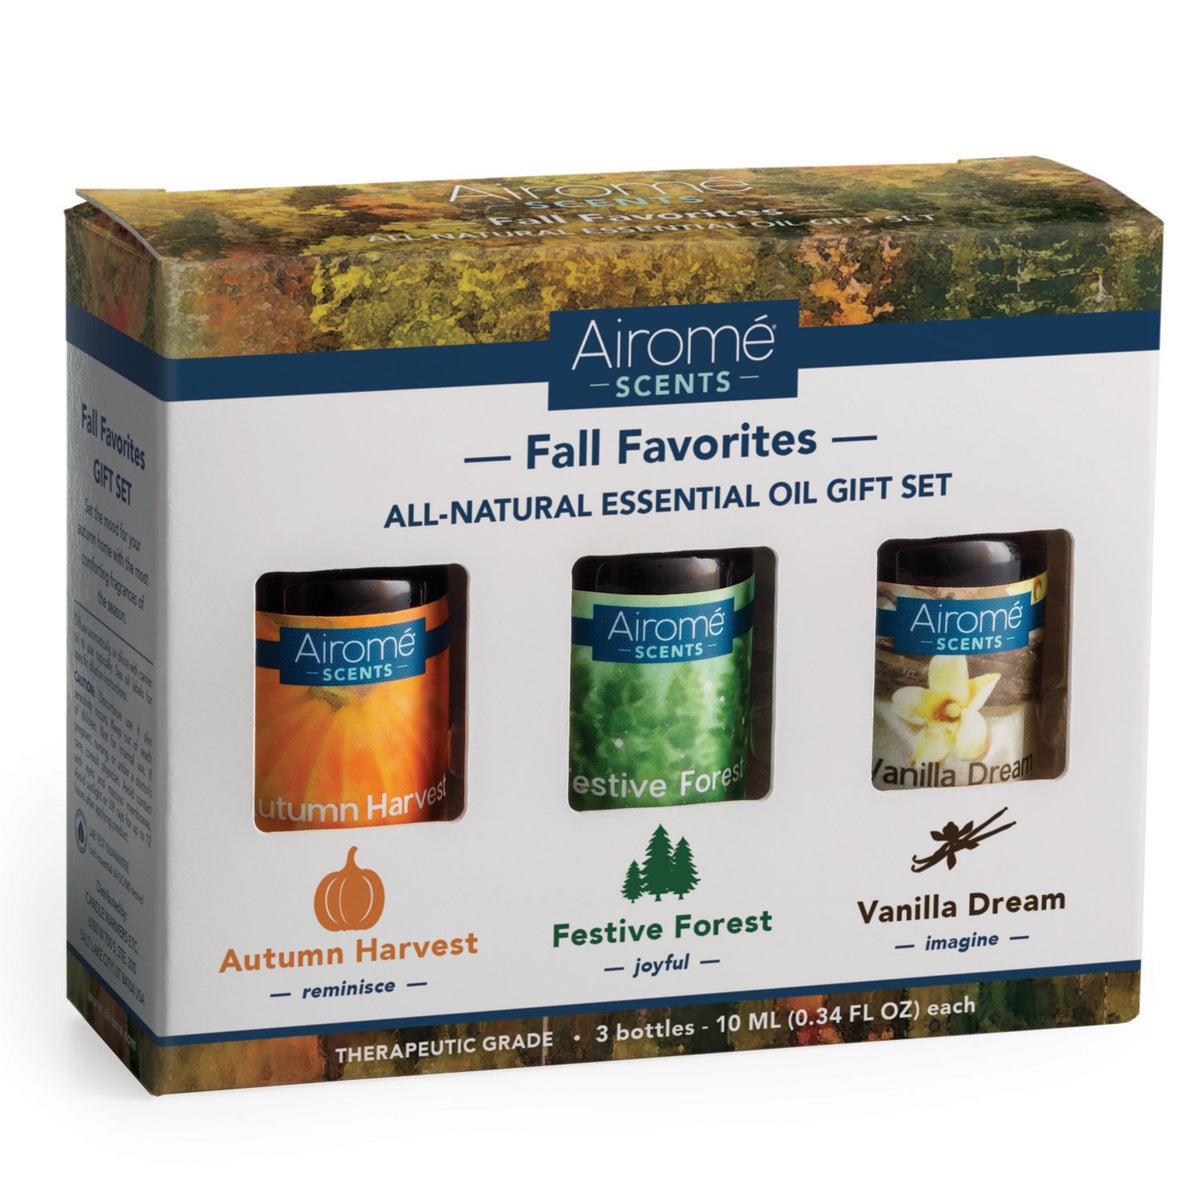 Essential Oils Gift Set - Airome Scents Fall Favorites - Includes Autumn Harvest, Festive Forest and